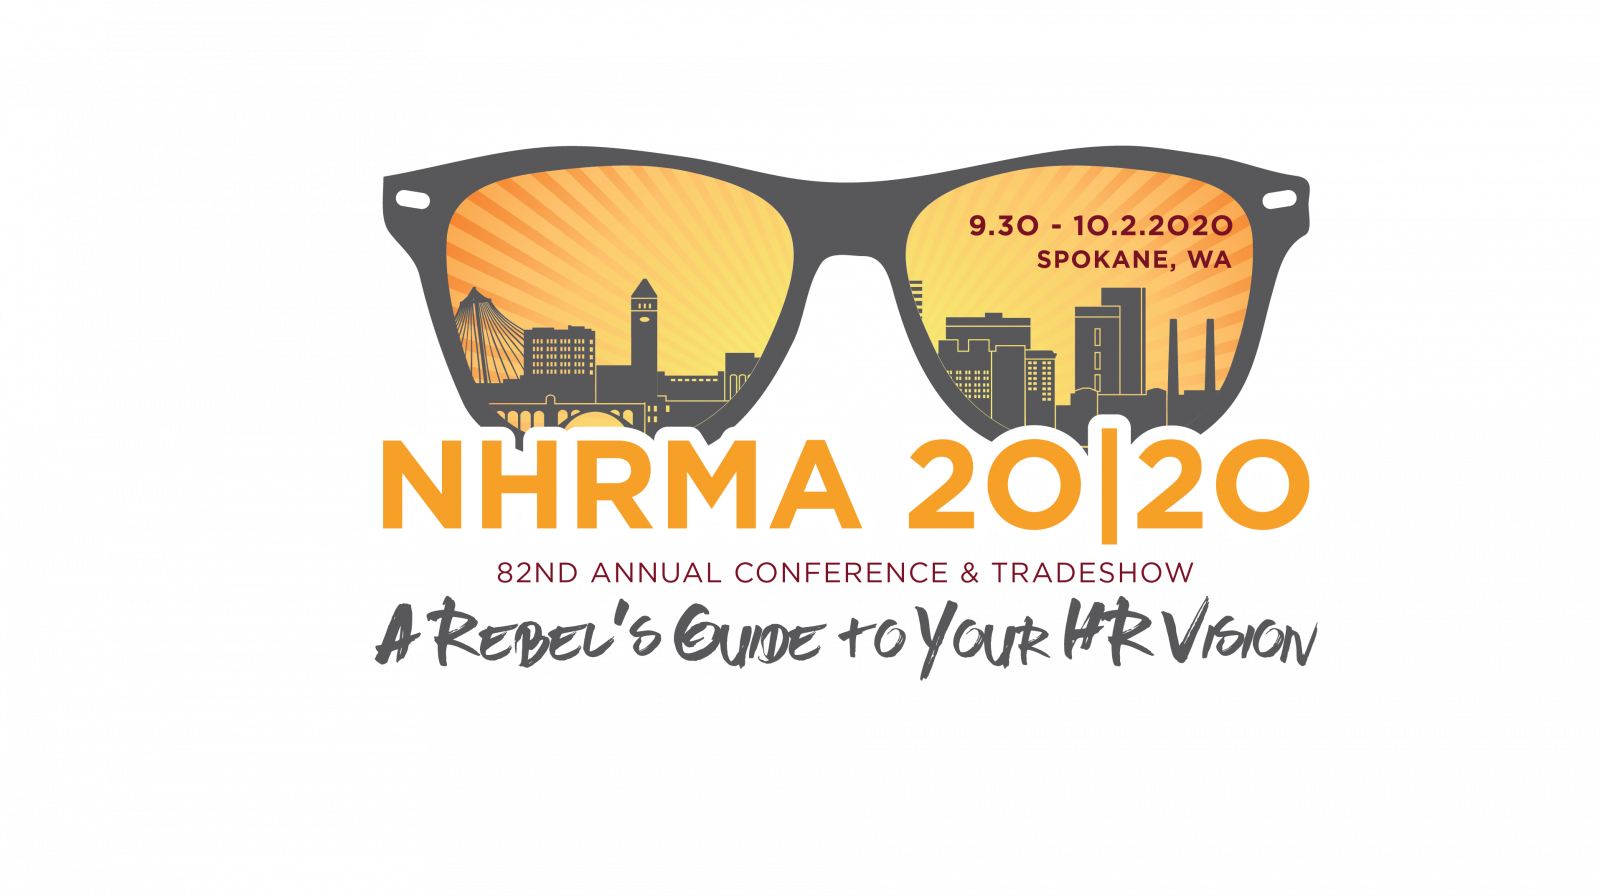 82nd Annual NHRMA Conference & Tradeshow Northwest Human Resource